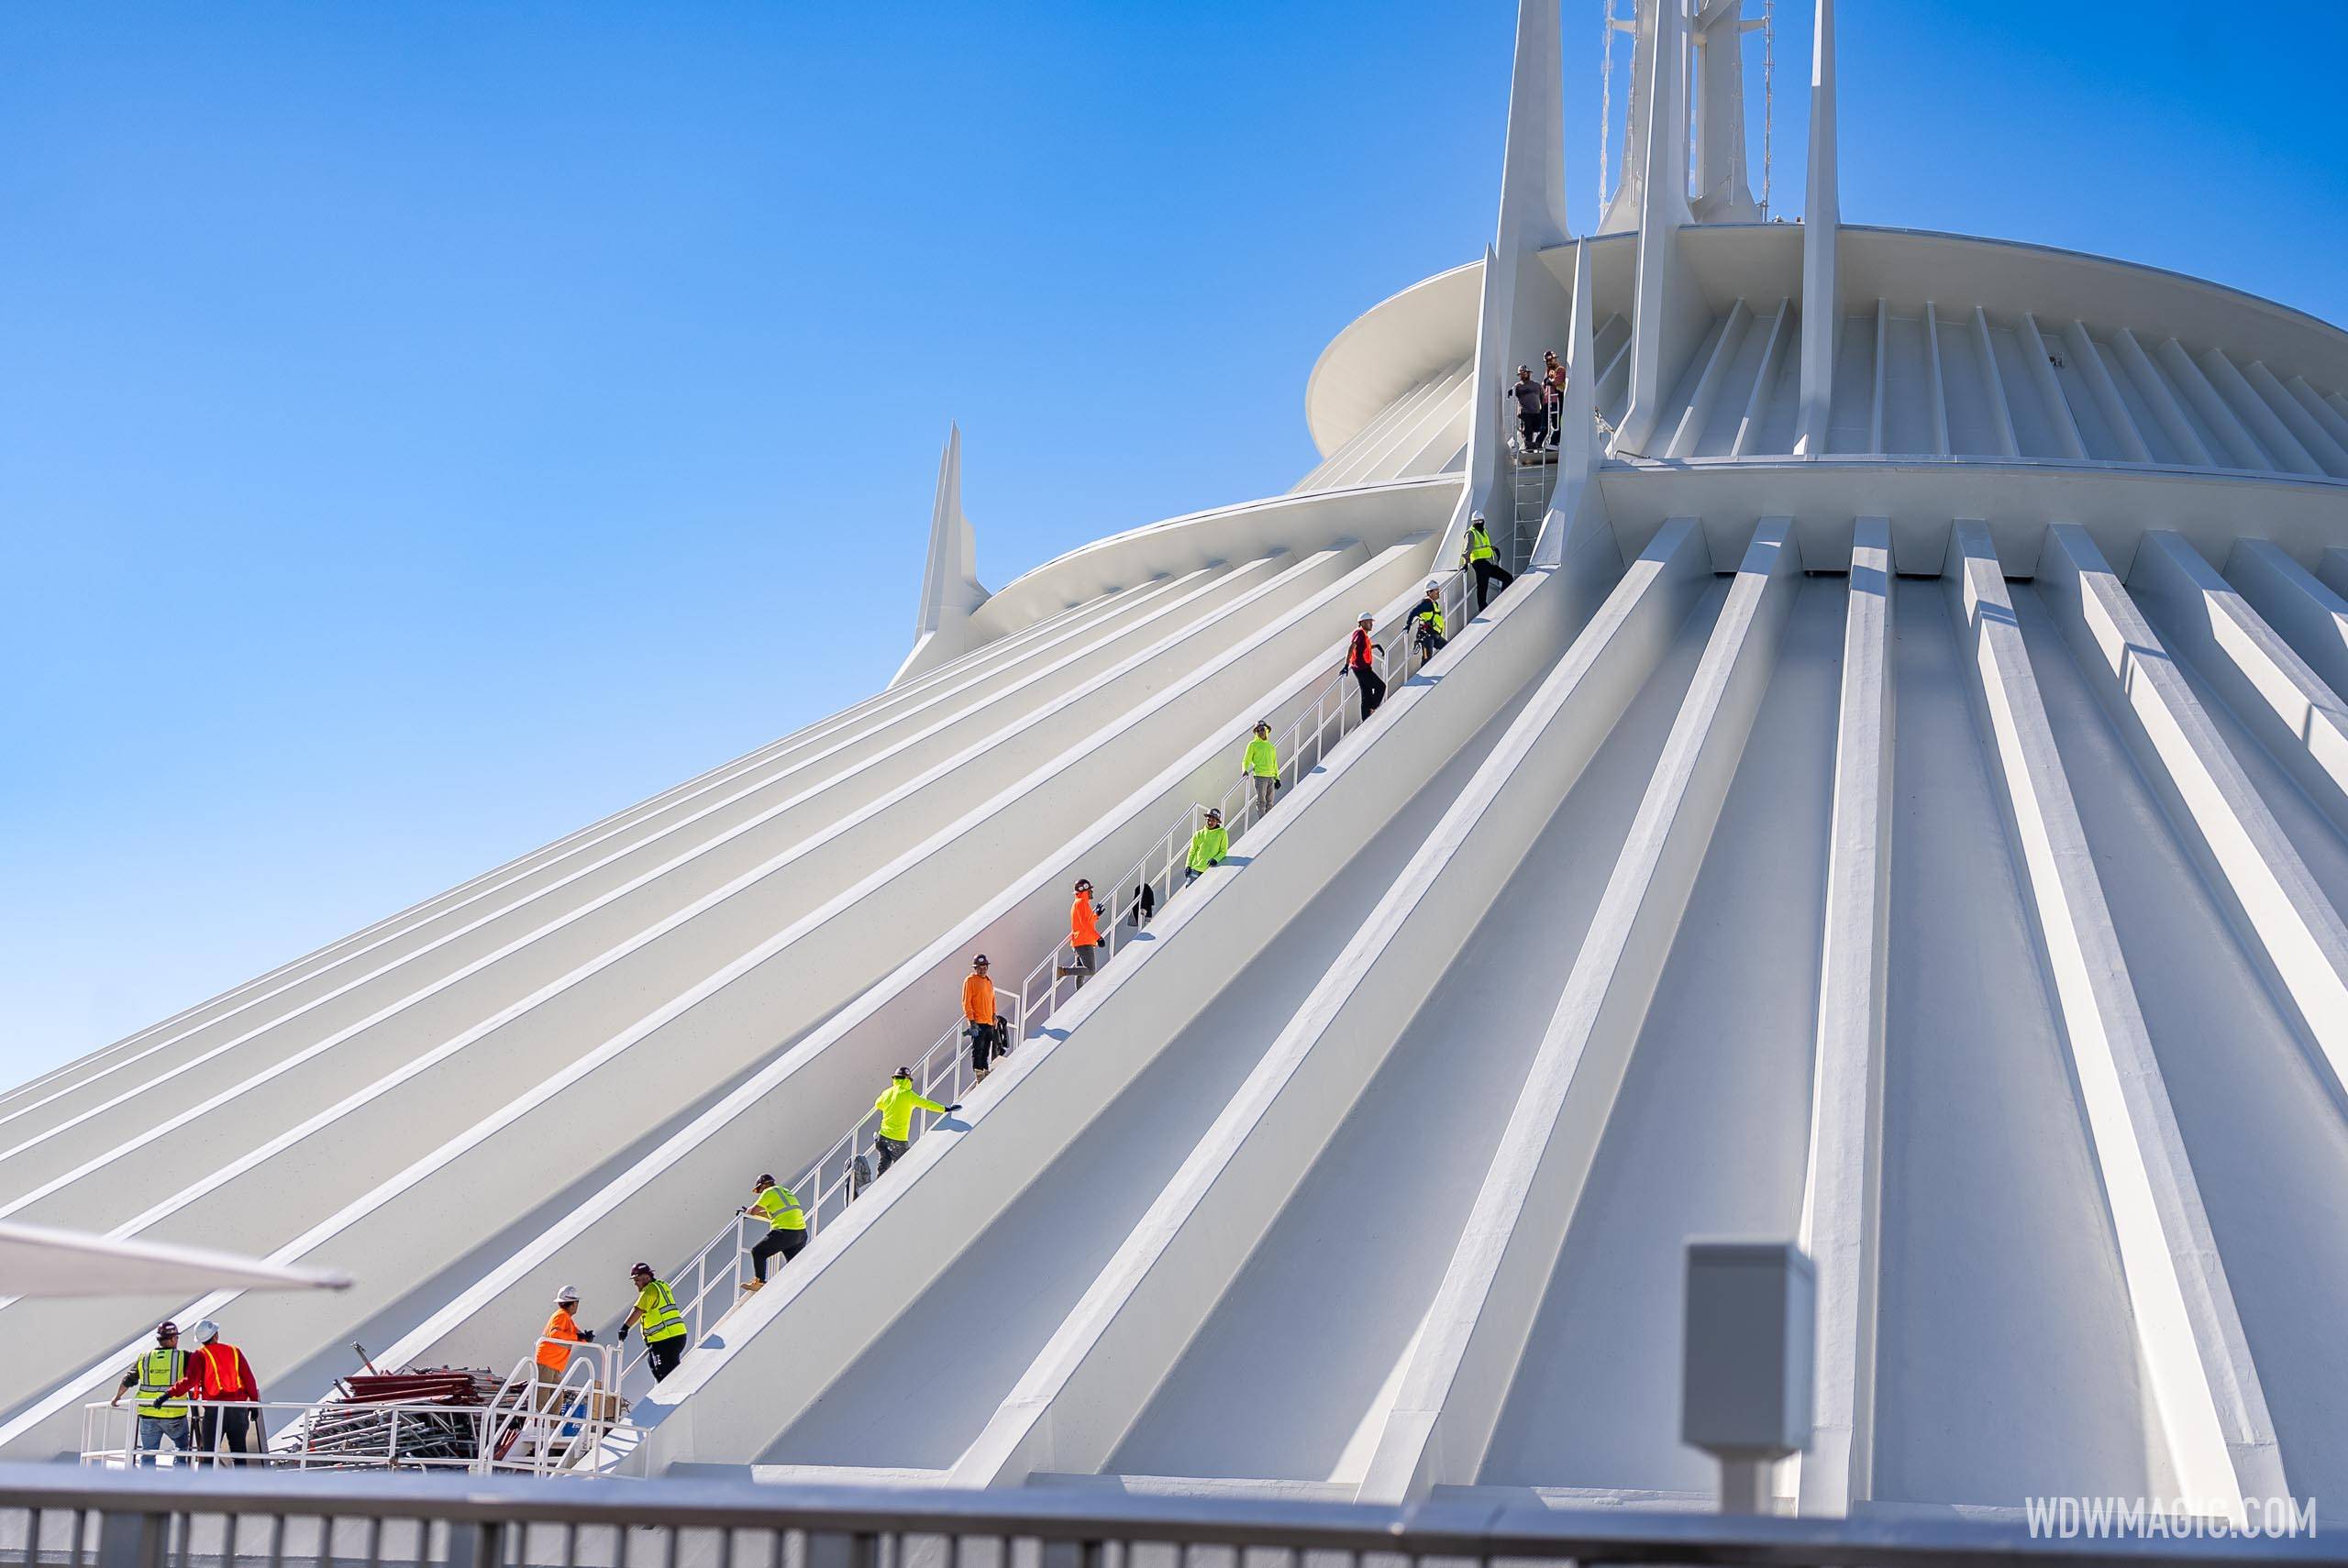 Sparkling Space Mountain revealed as crews wrap up the repaint of Space Mountain at Walt Disney World